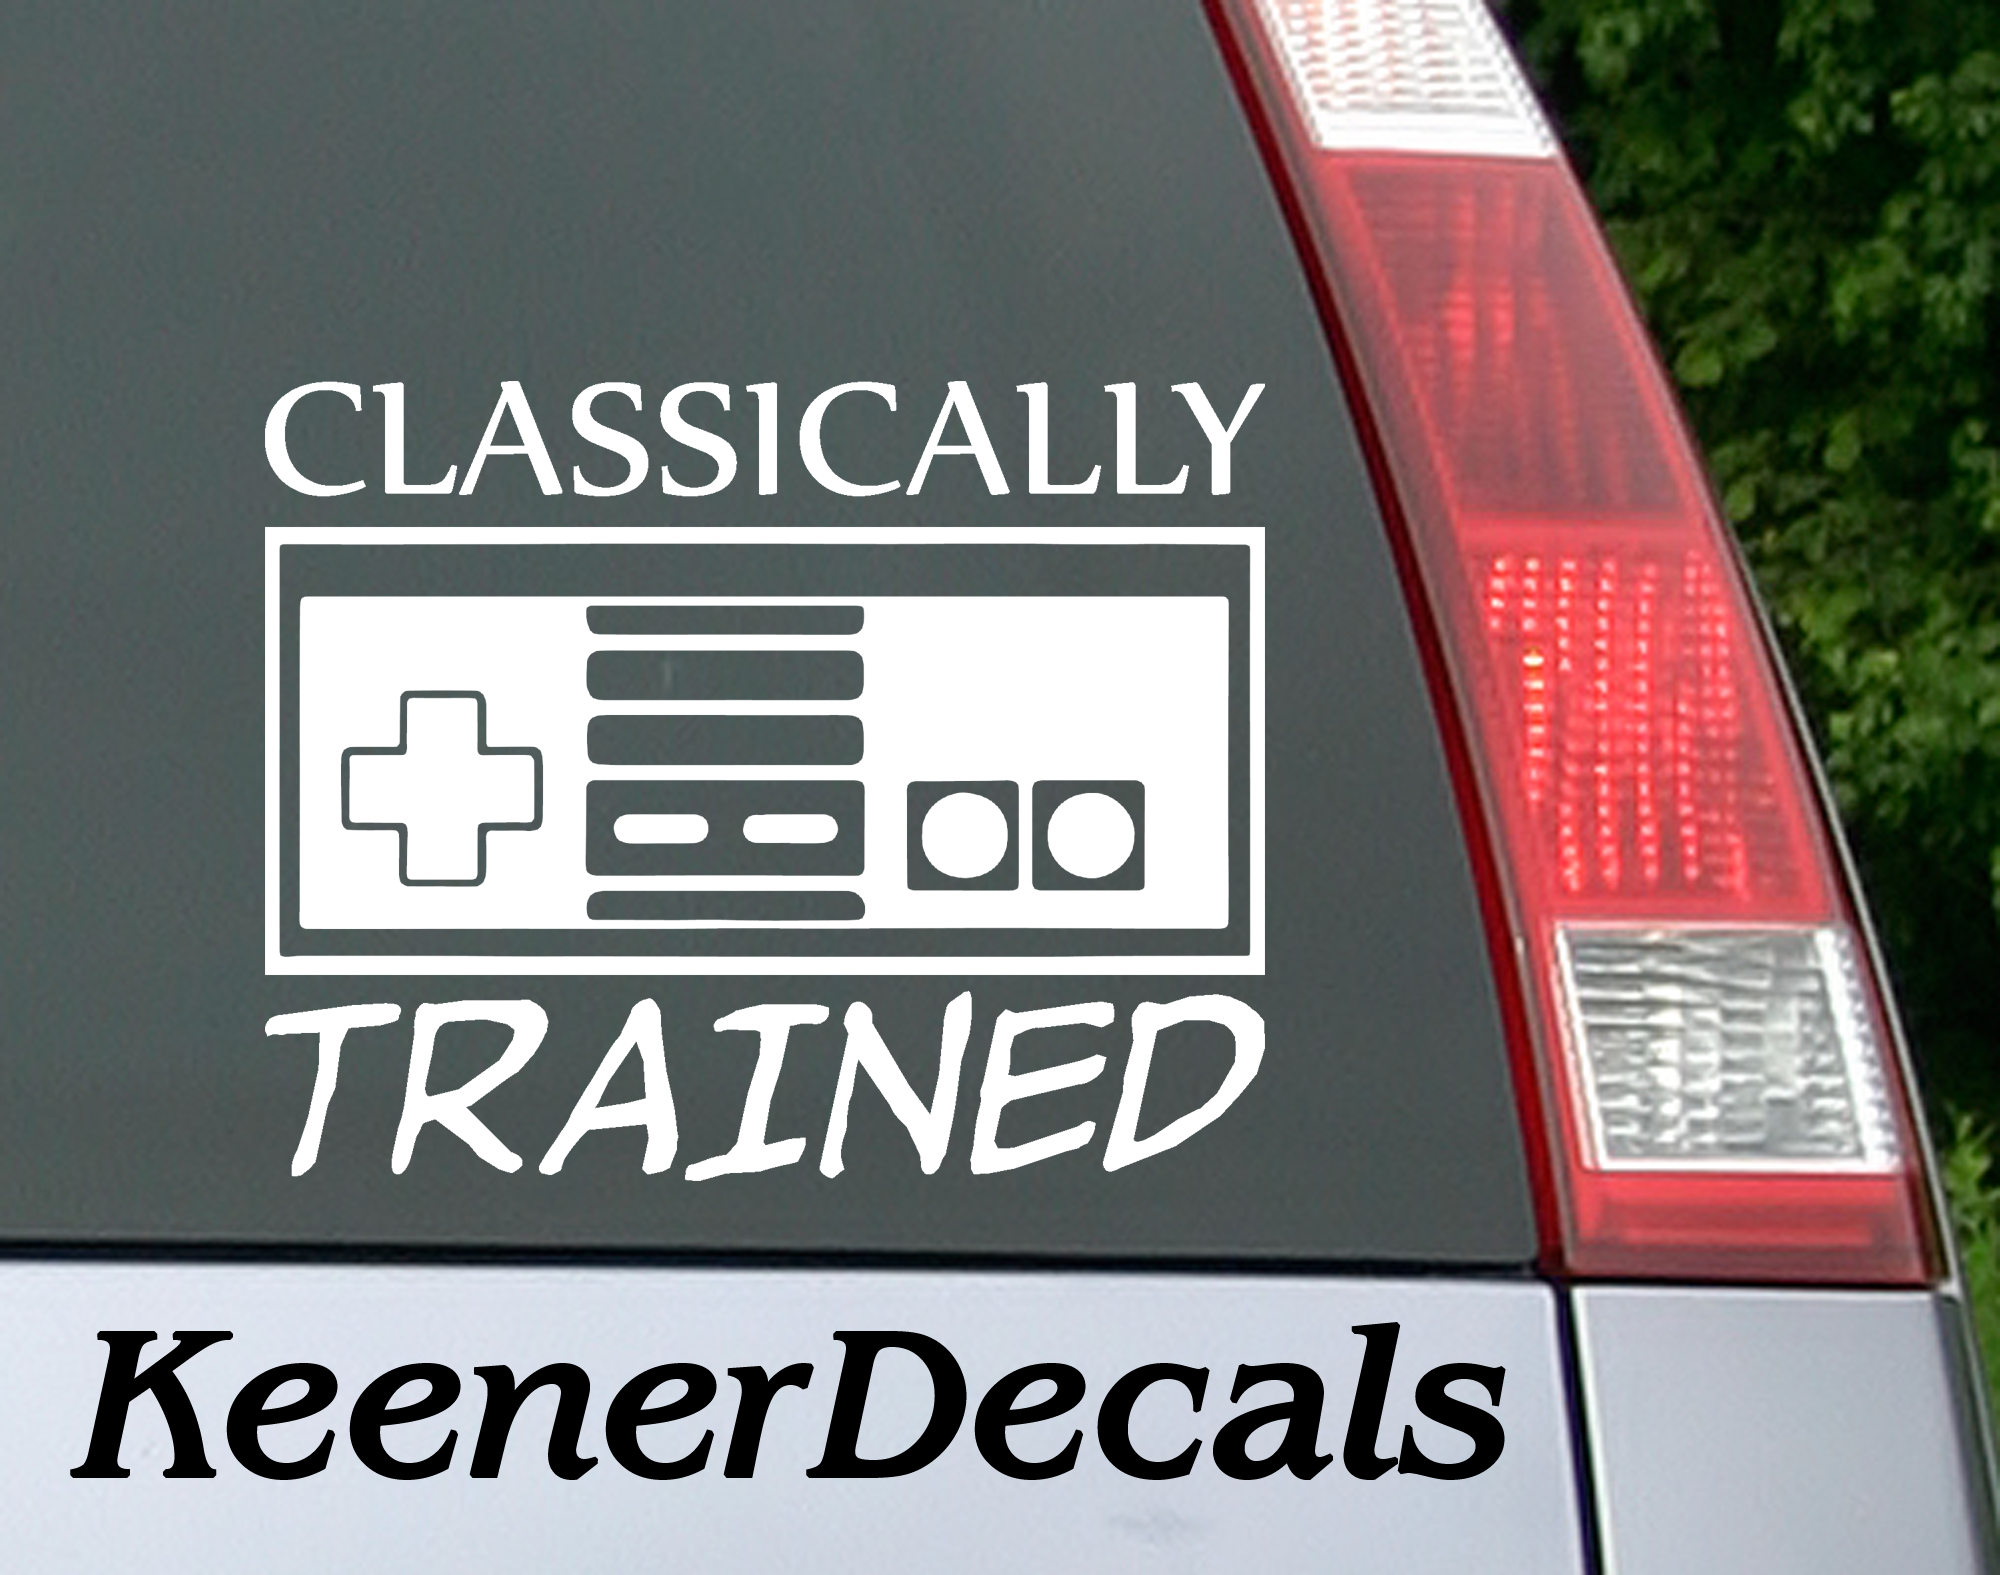 Classically Trained funny car decal. Will date you to a revolutionary time when video games were making huge leaps forward...pun intended.  5"W x 4"H Funny Car Decal, Car Sticker, Car Vinyl, Bumper Sticker, Vinyl Stickers, Vinyl Sticker.